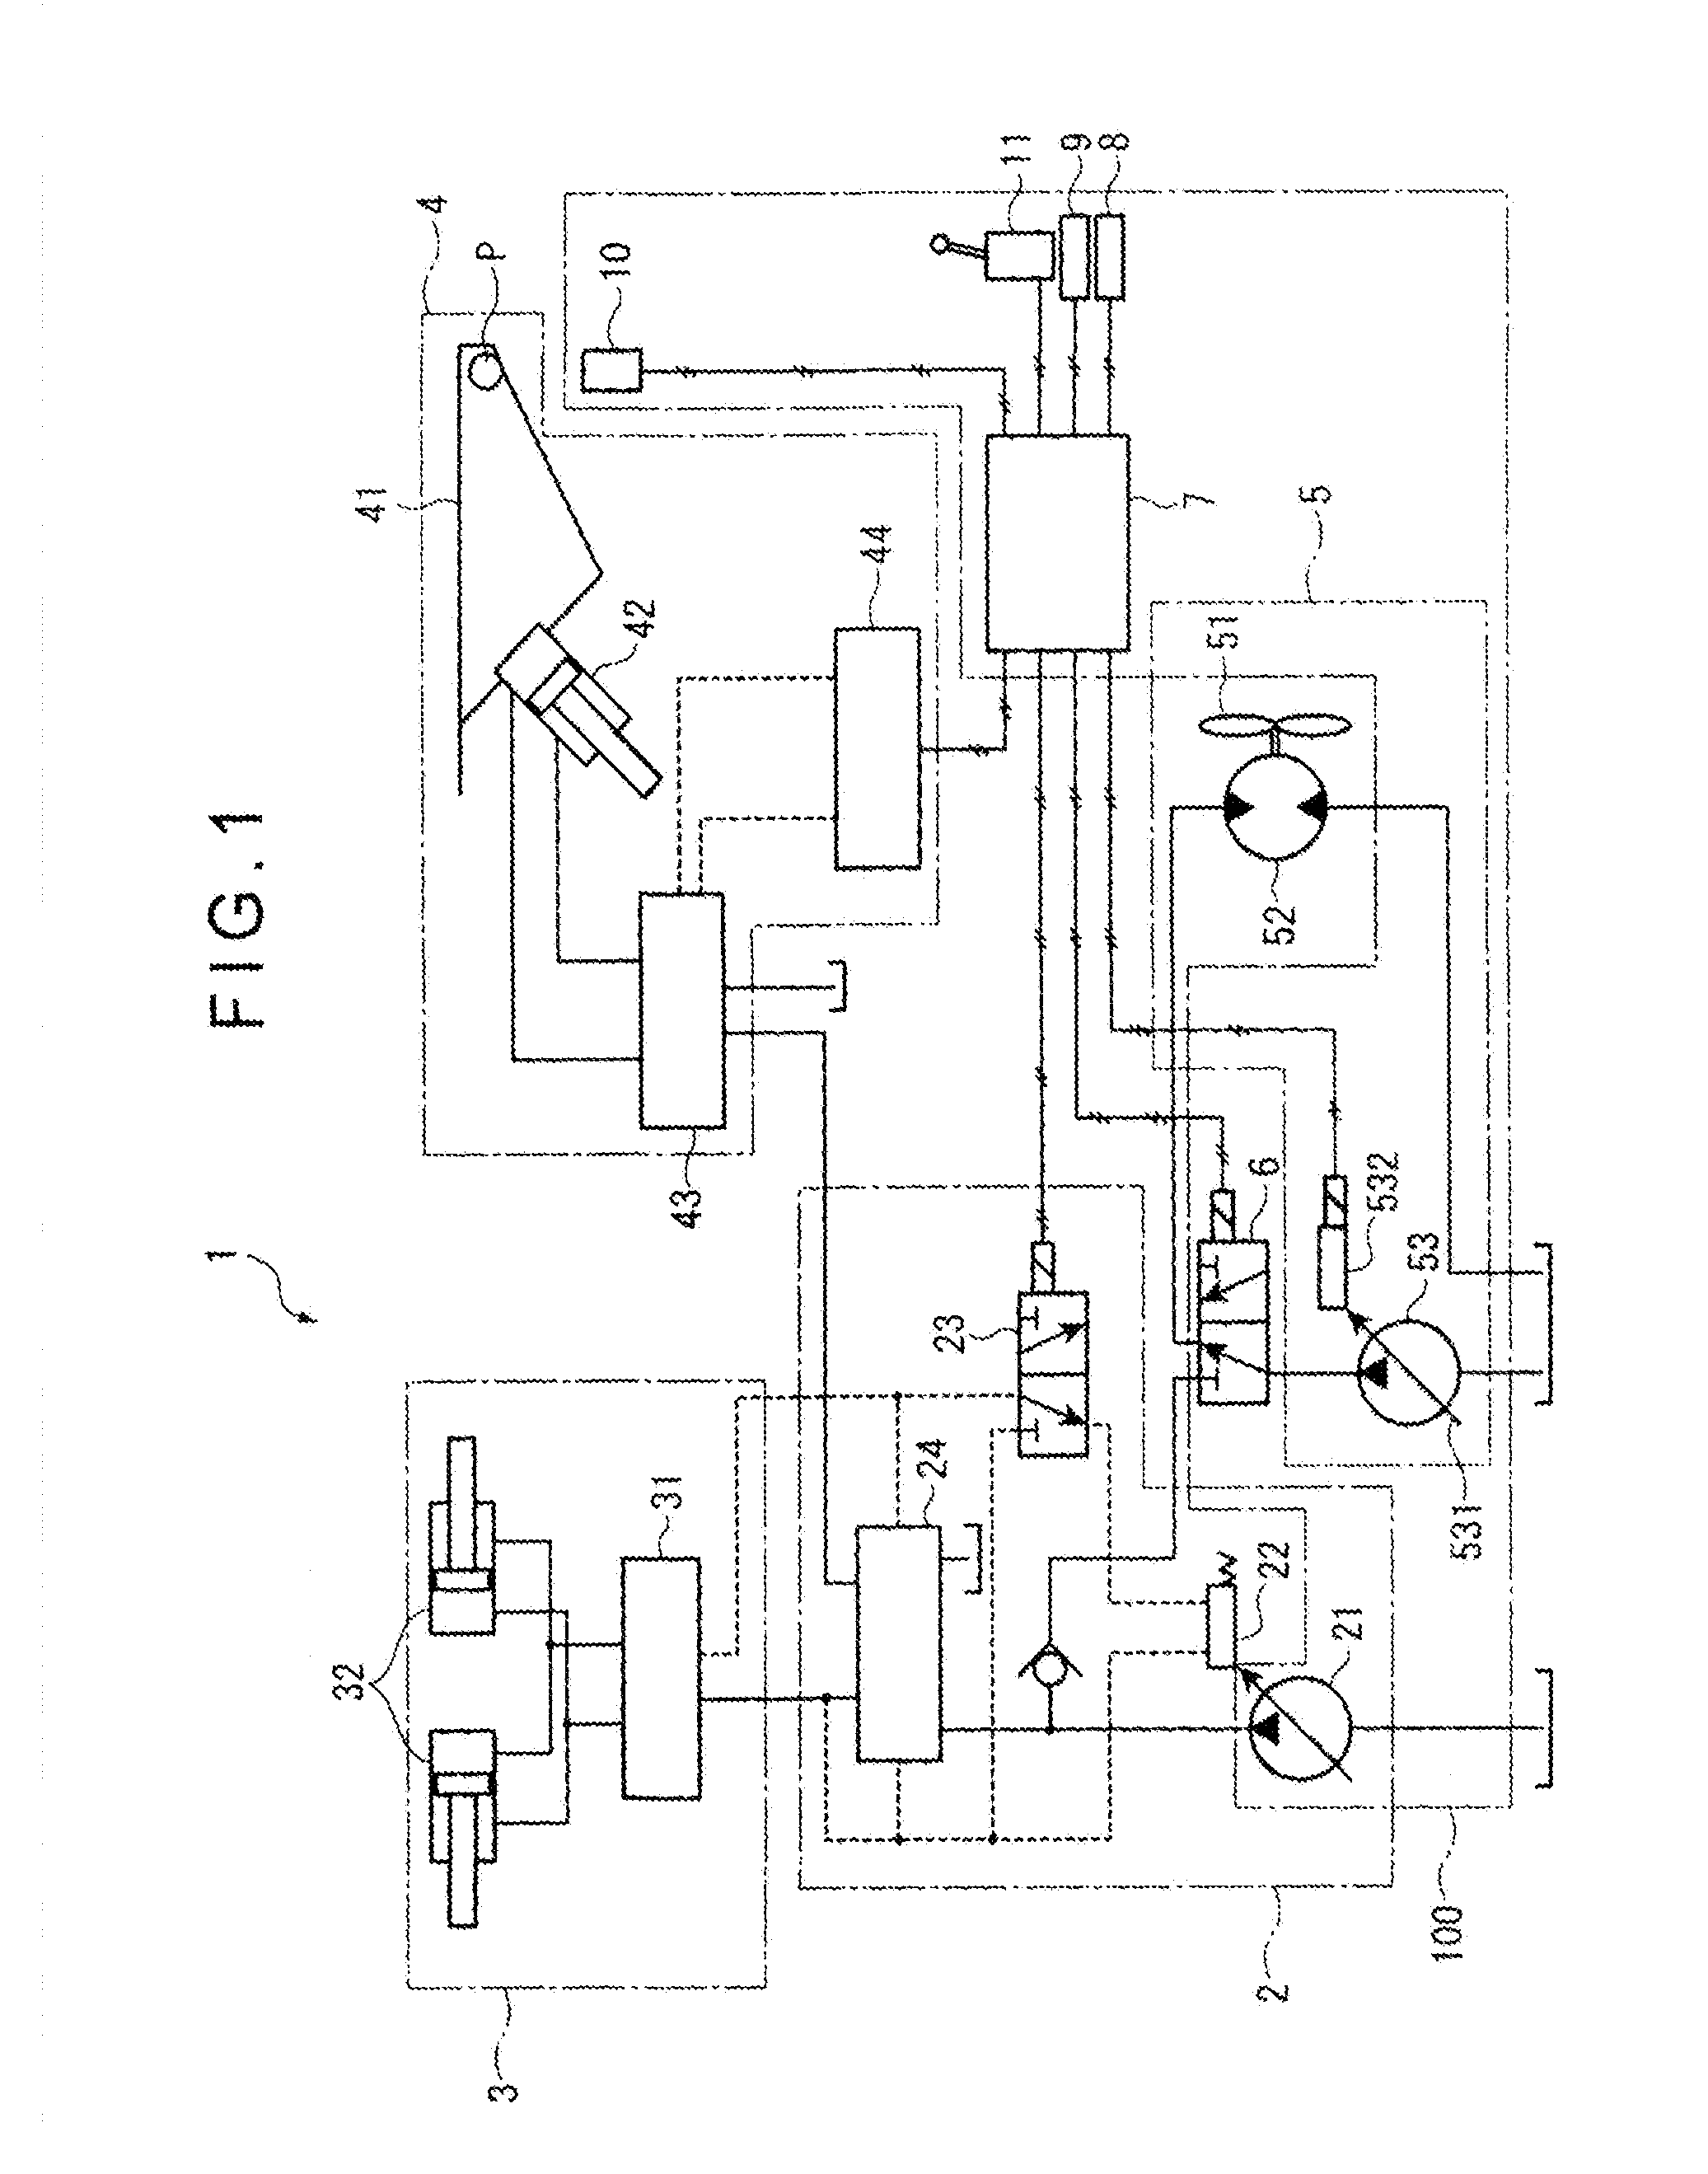 Operating Oil Supplying Device and Construction Machine